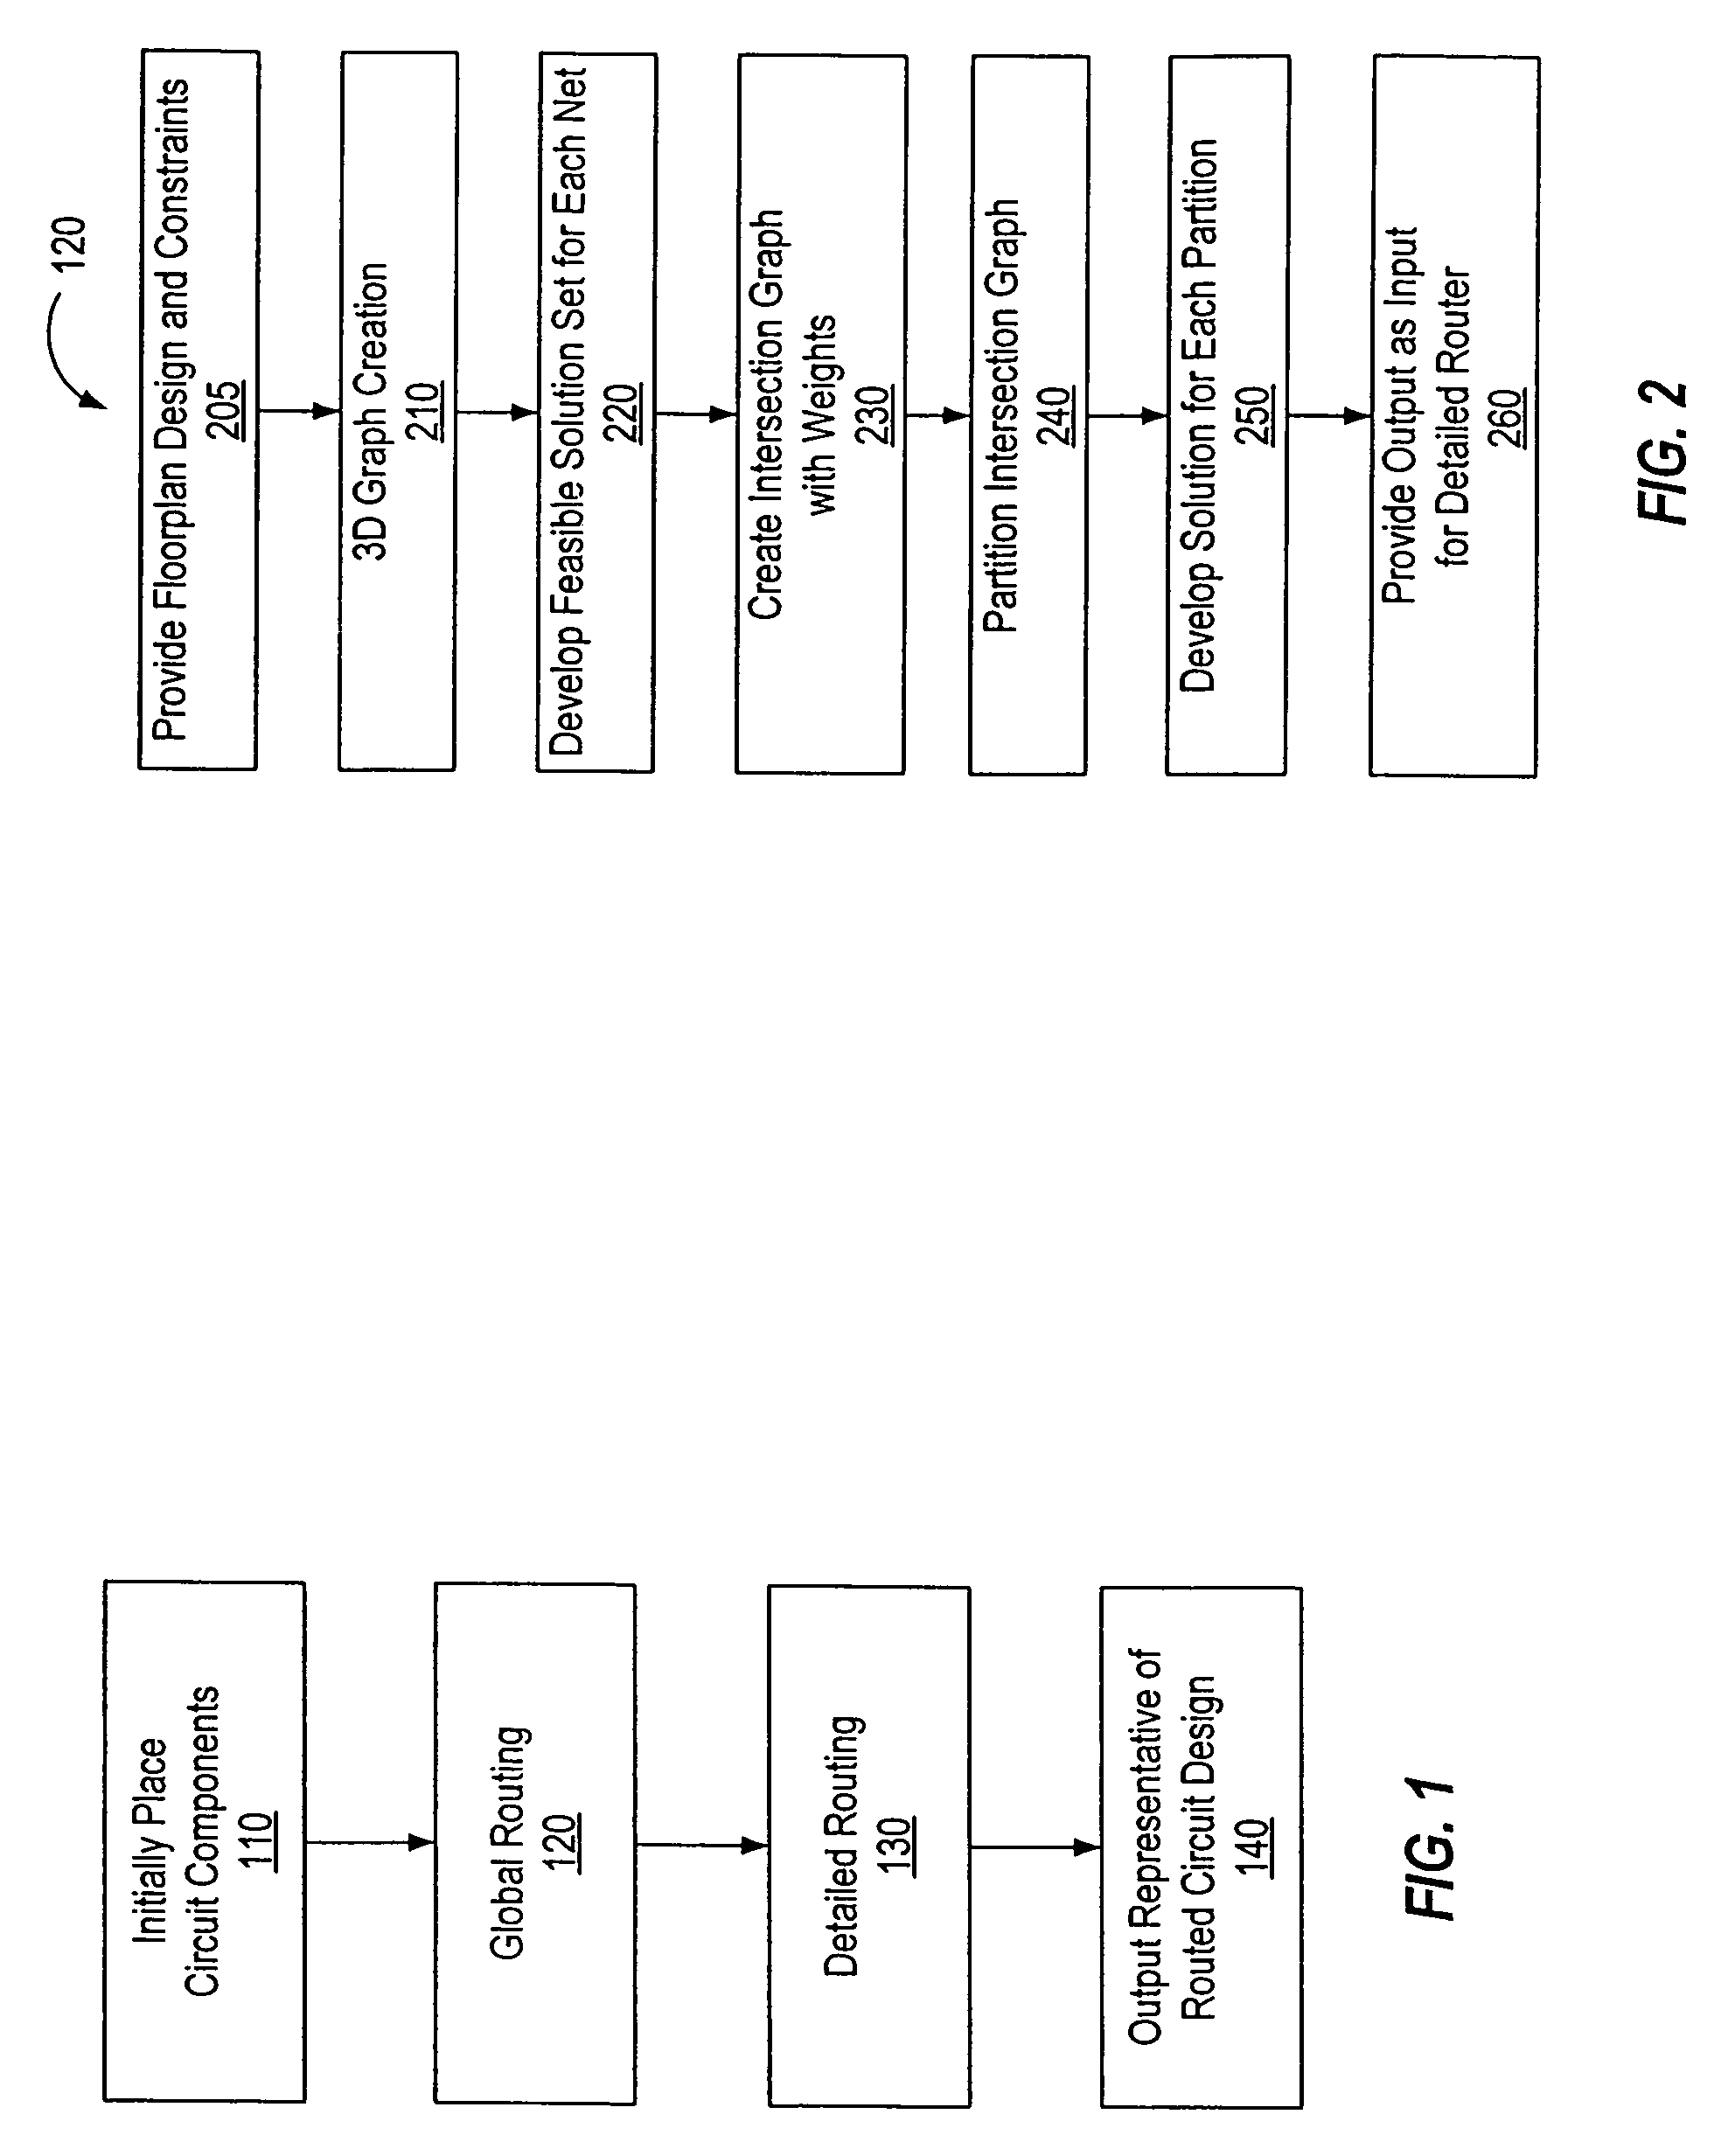 Constraint-based global router for routing high performance designs